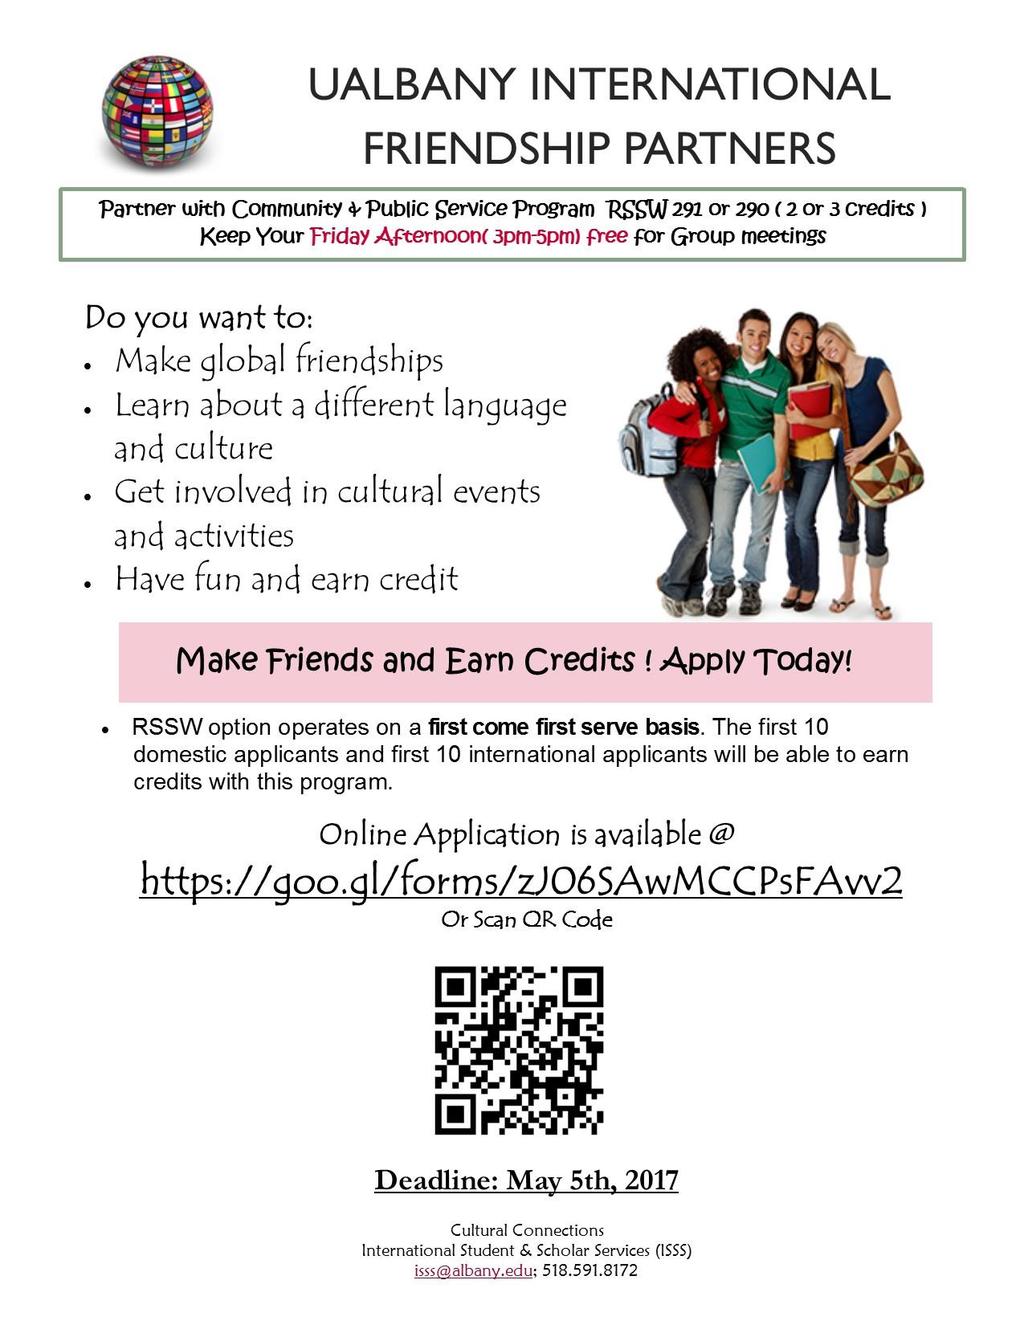 Be an International Friendship Partner next semester! Do you want to be part of the UAlbany multicultural community? Do you want to earn credits while having fun?